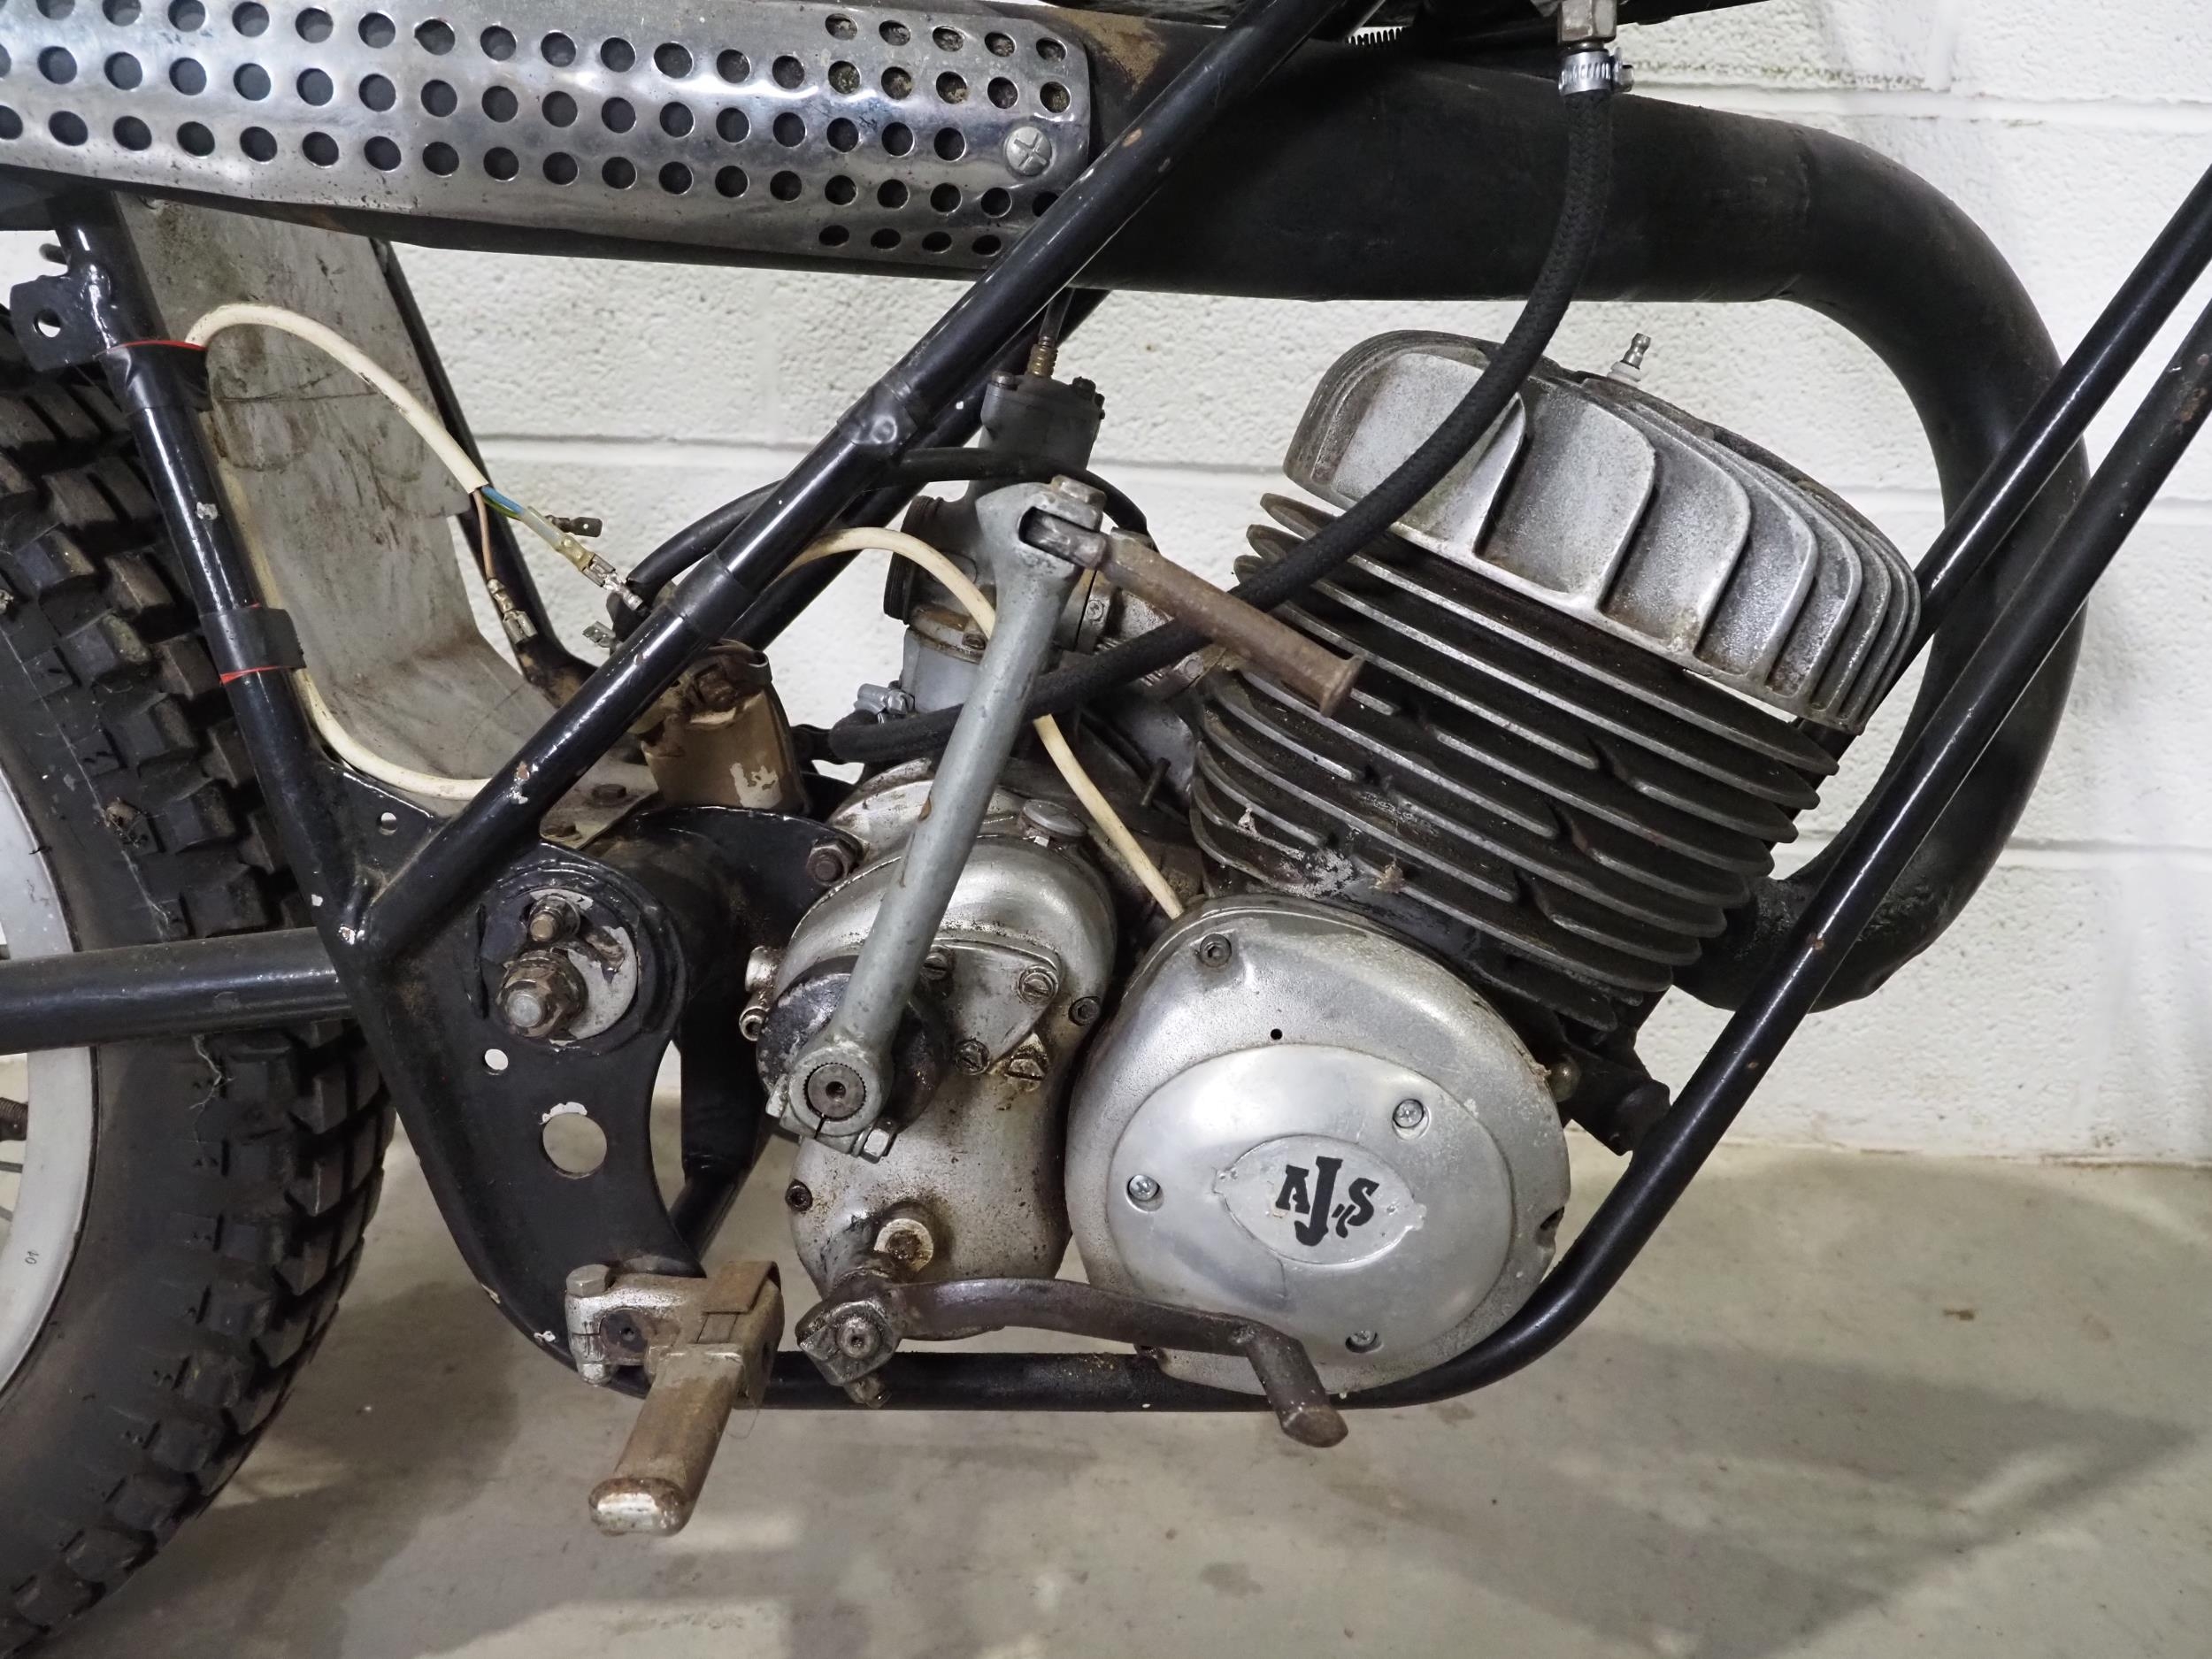 AJS Stormer motorcycle project. 250cc Engine No. 250402A3352 Non runner. Engine turns over. No Docs - Image 4 of 6